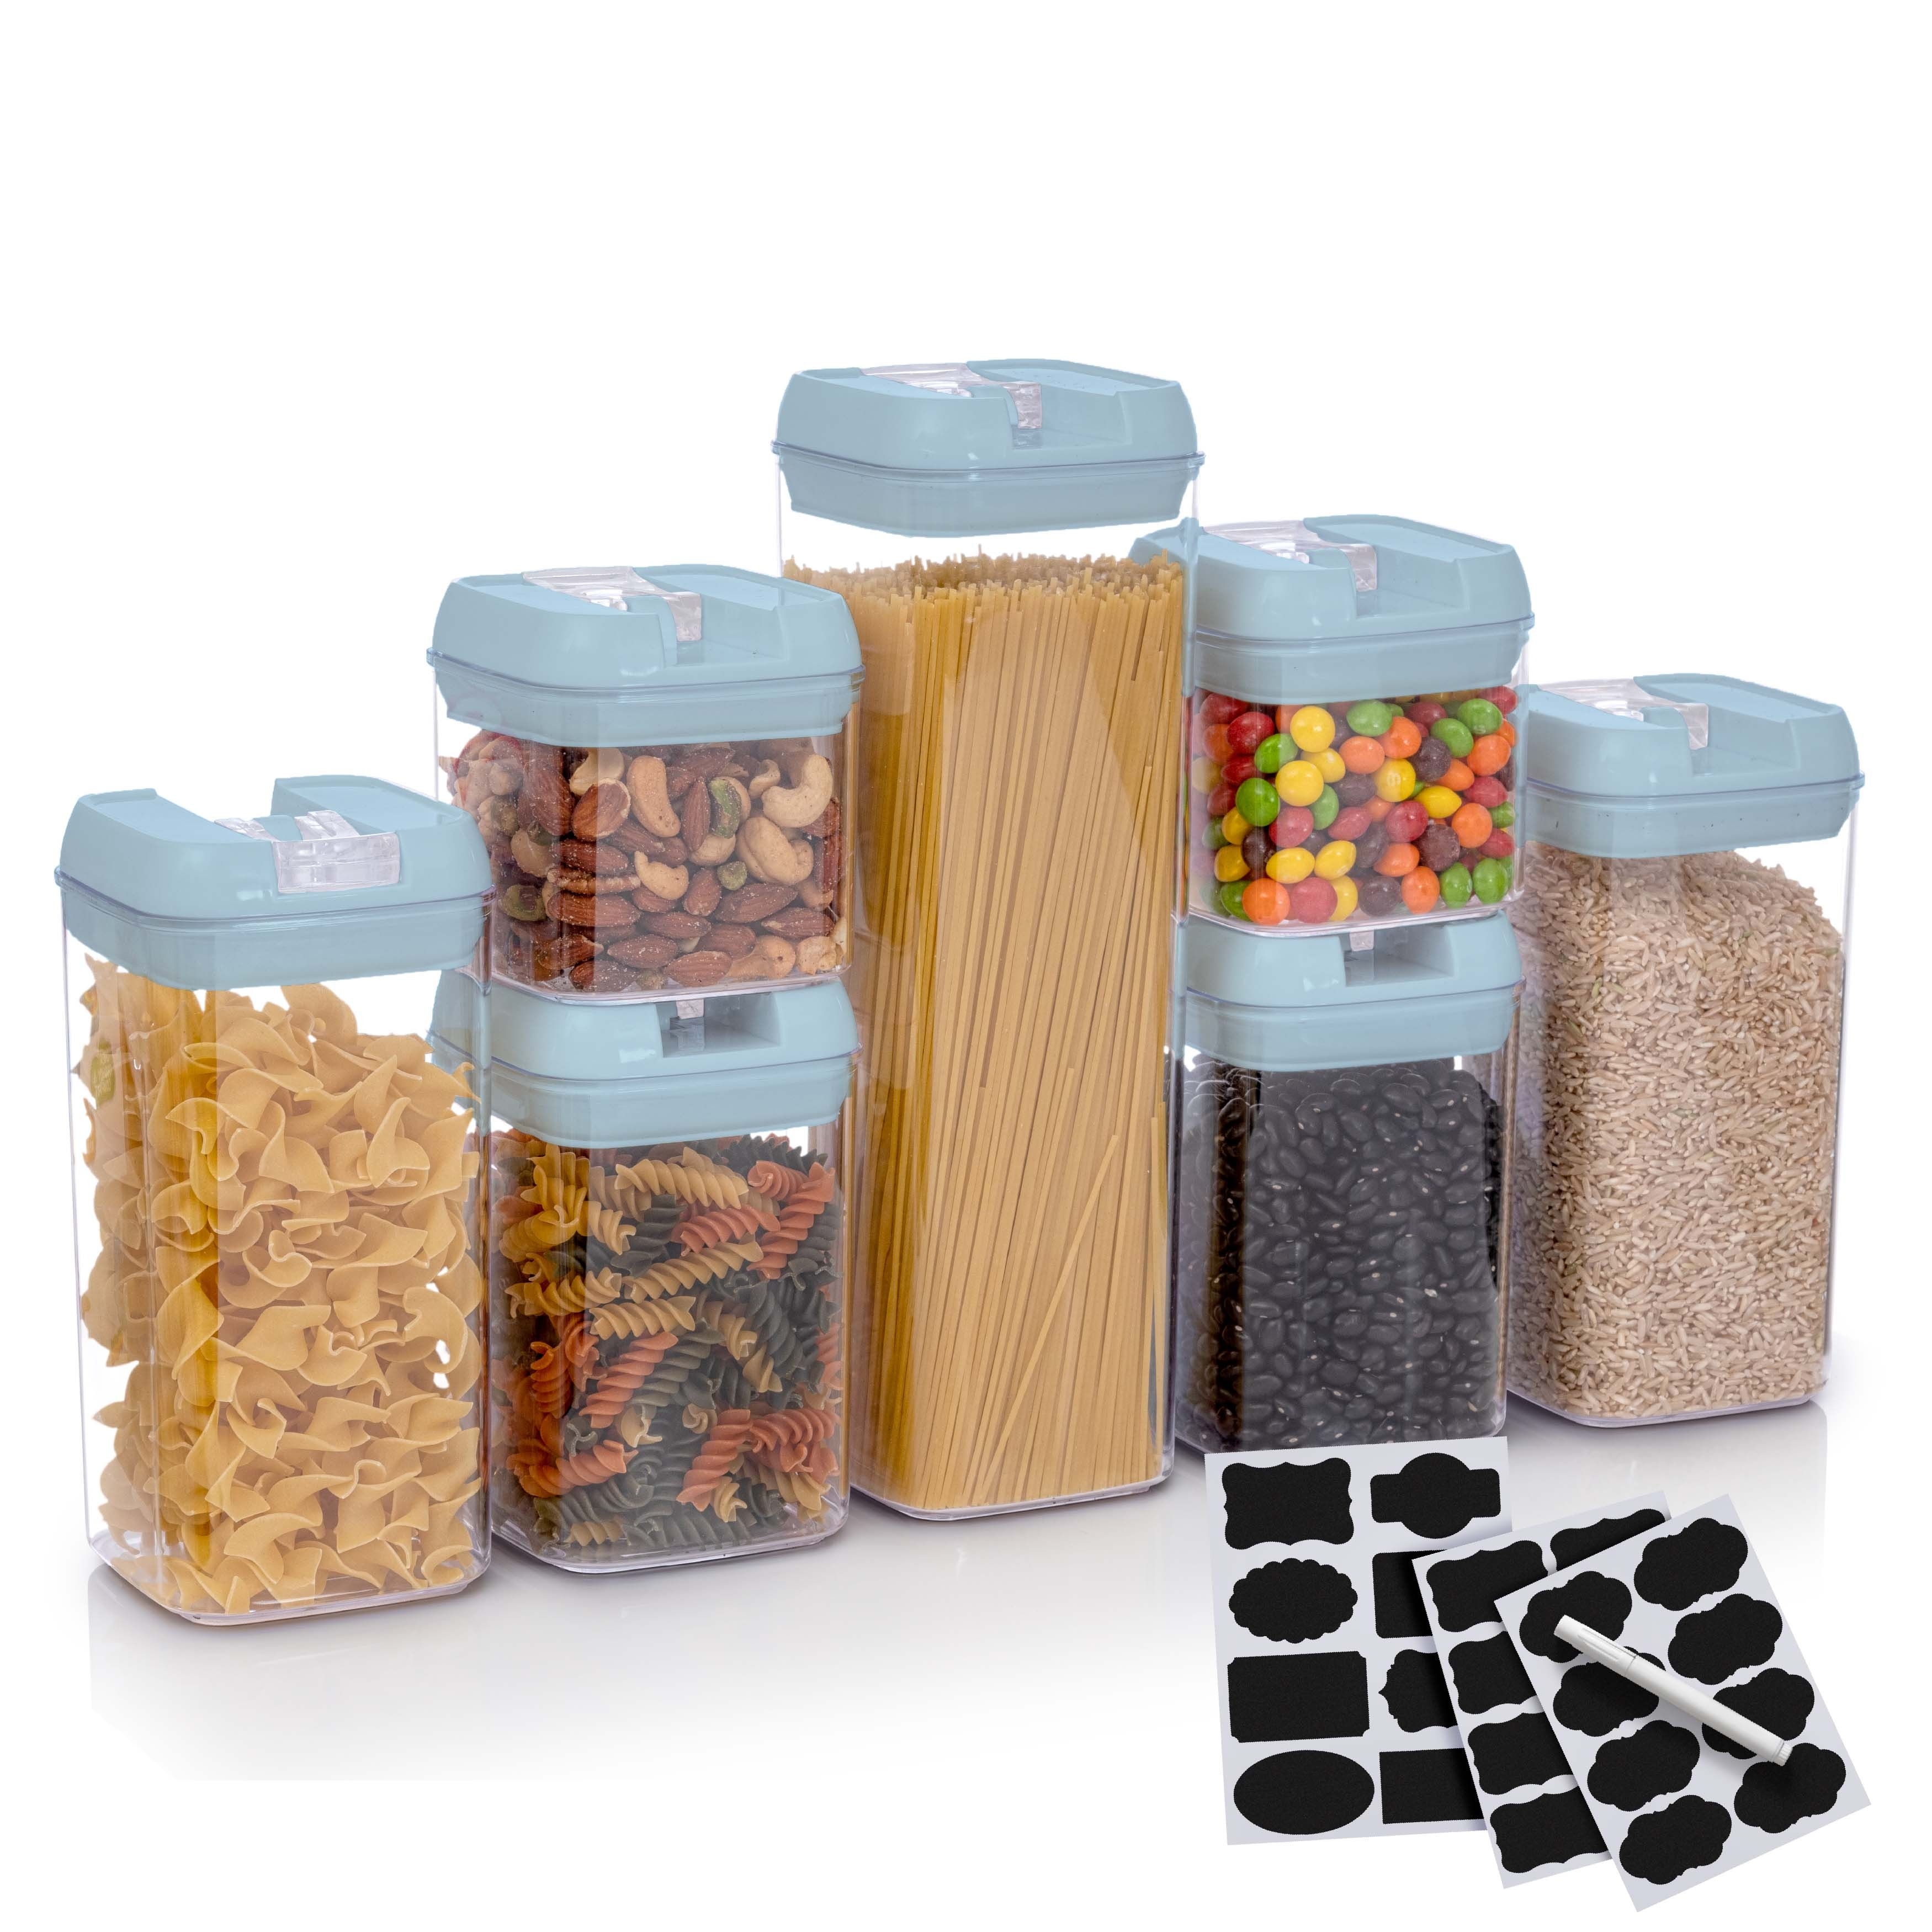 https://ak1.ostkcdn.com/images/products/is/images/direct/29ff300553c4ac7f7e40dccac53b951c0136db58/Cheer-Collection-7-piece-Stackable-Airtight-Food-Storage-Container-Set.jpg